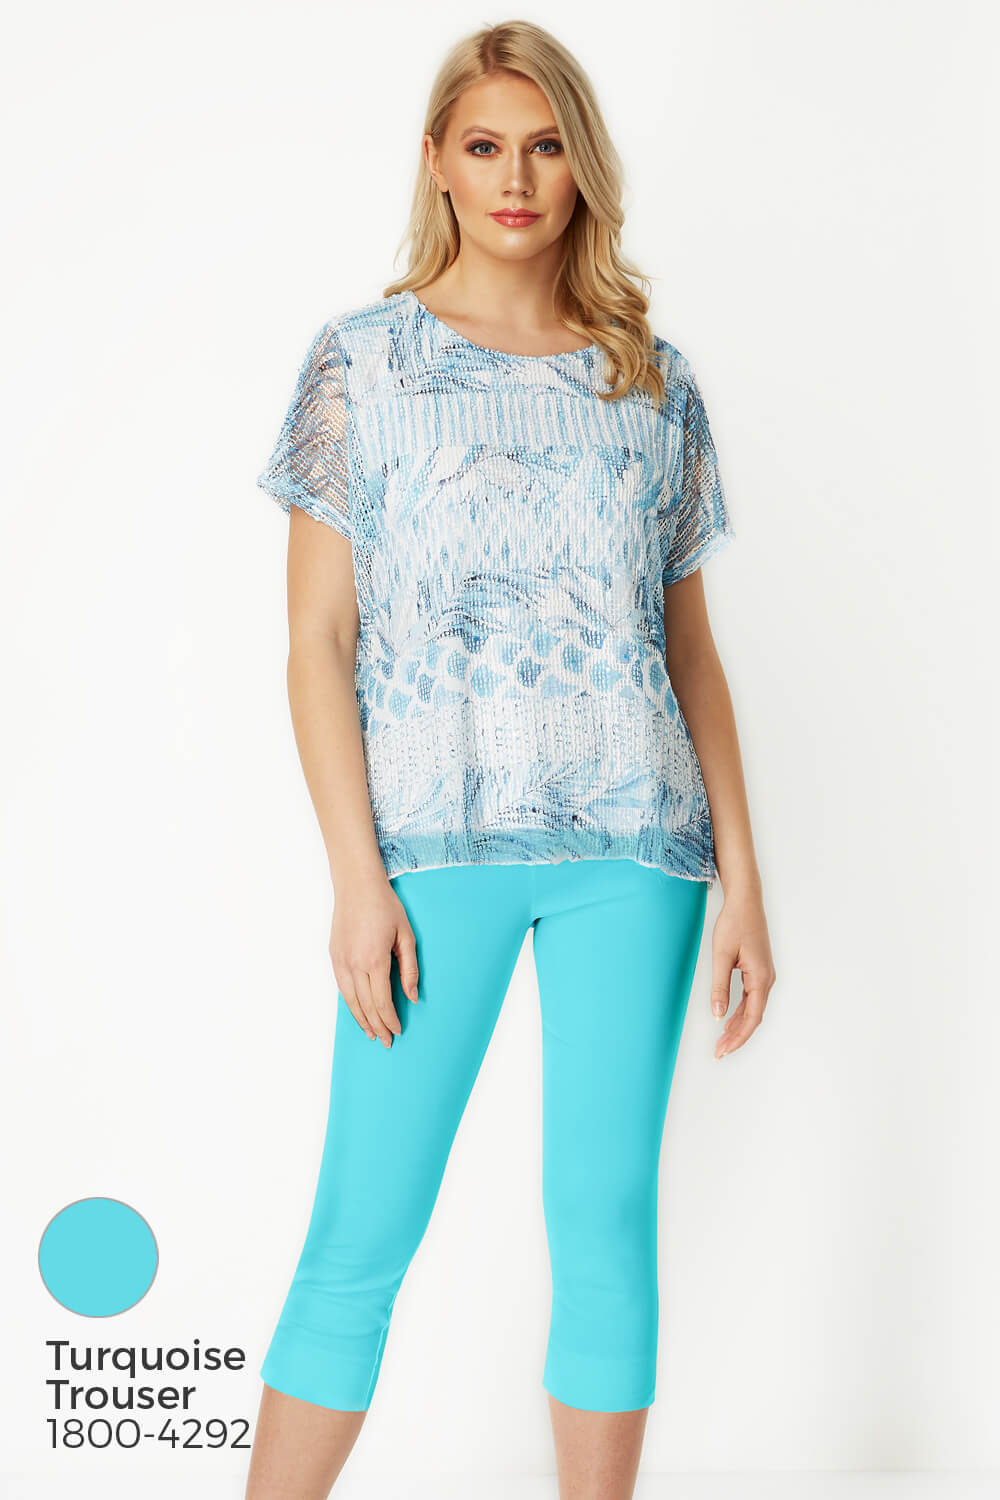 Blue Tropical Print Net Overlay Top, Image 8 of 8